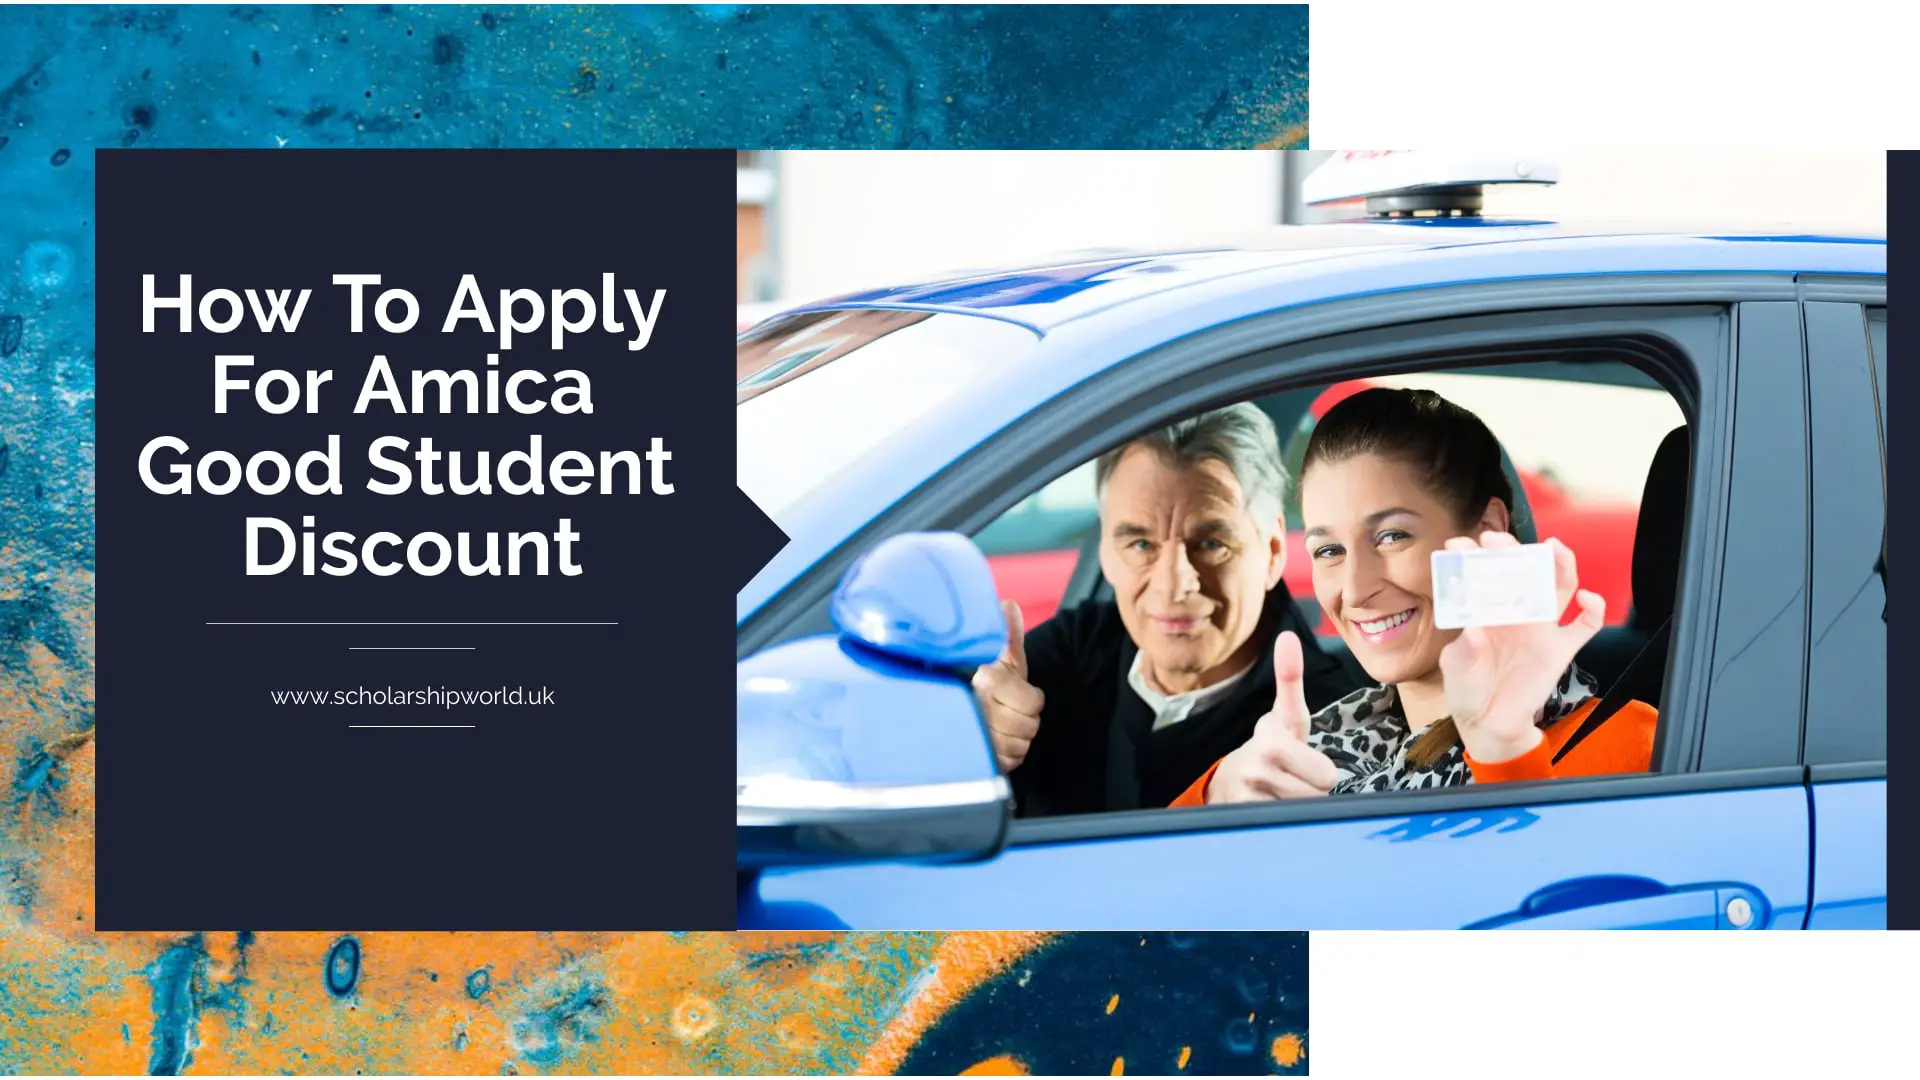 How To Apply For Amica Good Student Discount